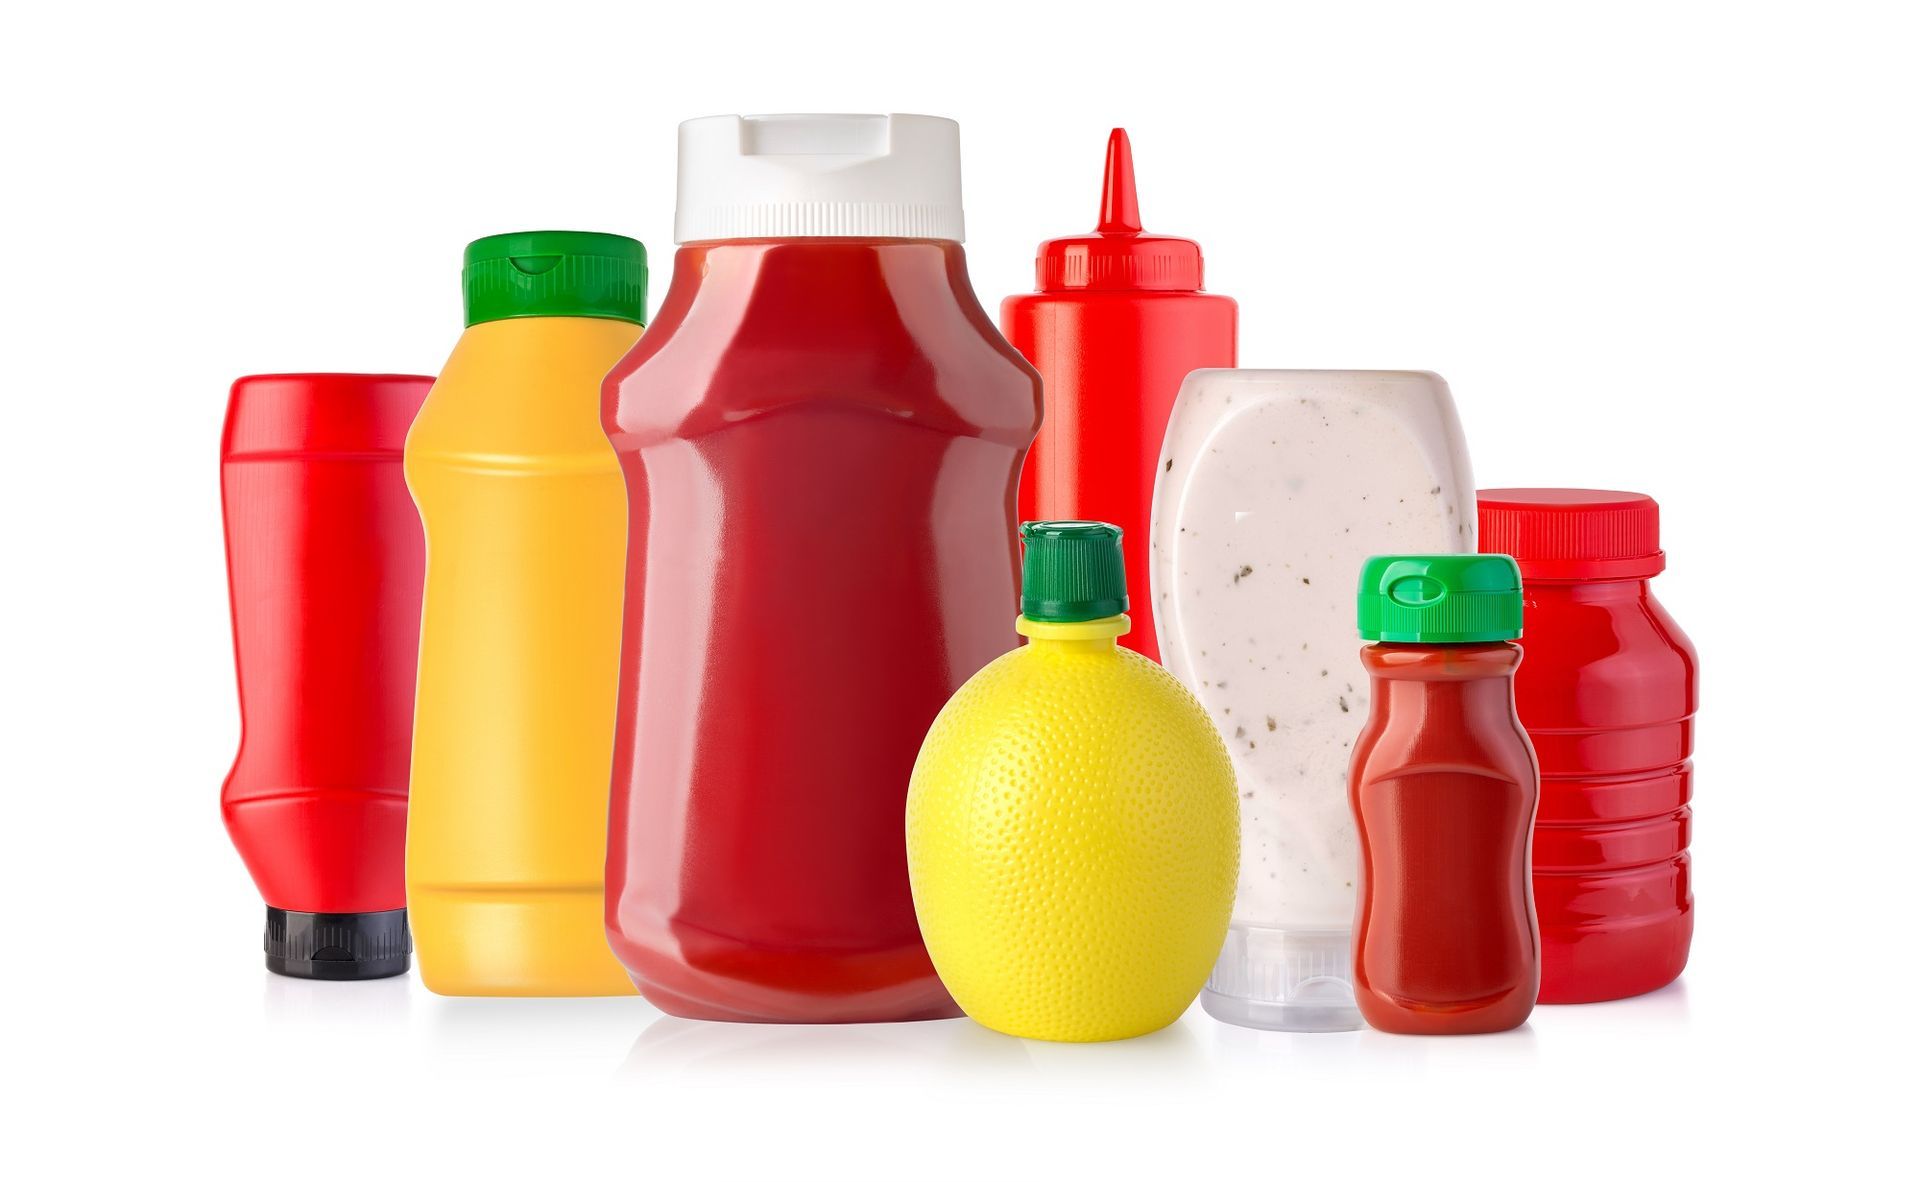 Condiments (catsup, mustard, and other sauces) packaged in recycled PET/rPET plastic.